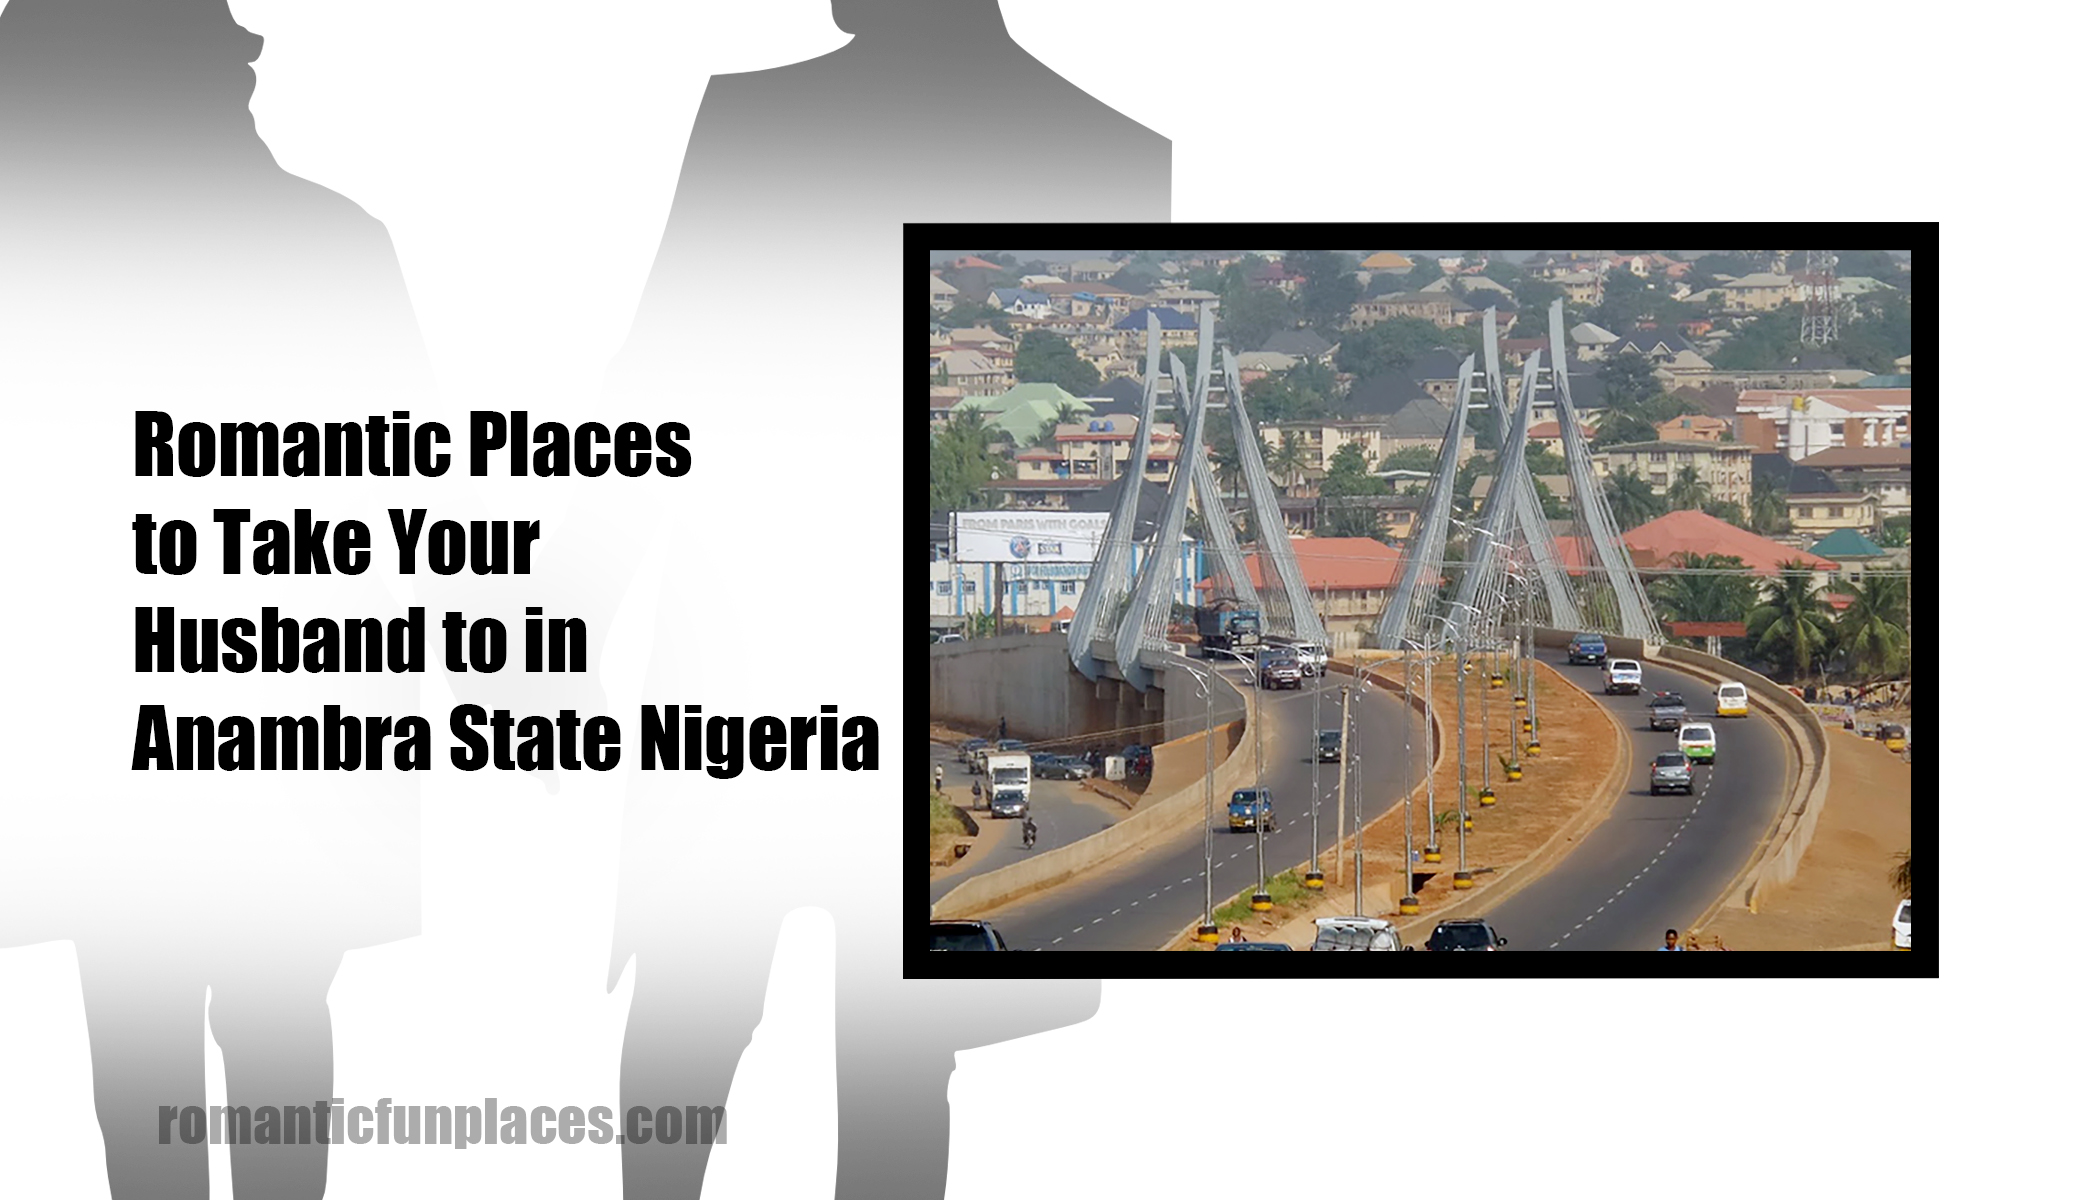 Romantic Places to Take Your Husband to in Anambra State Nigeria